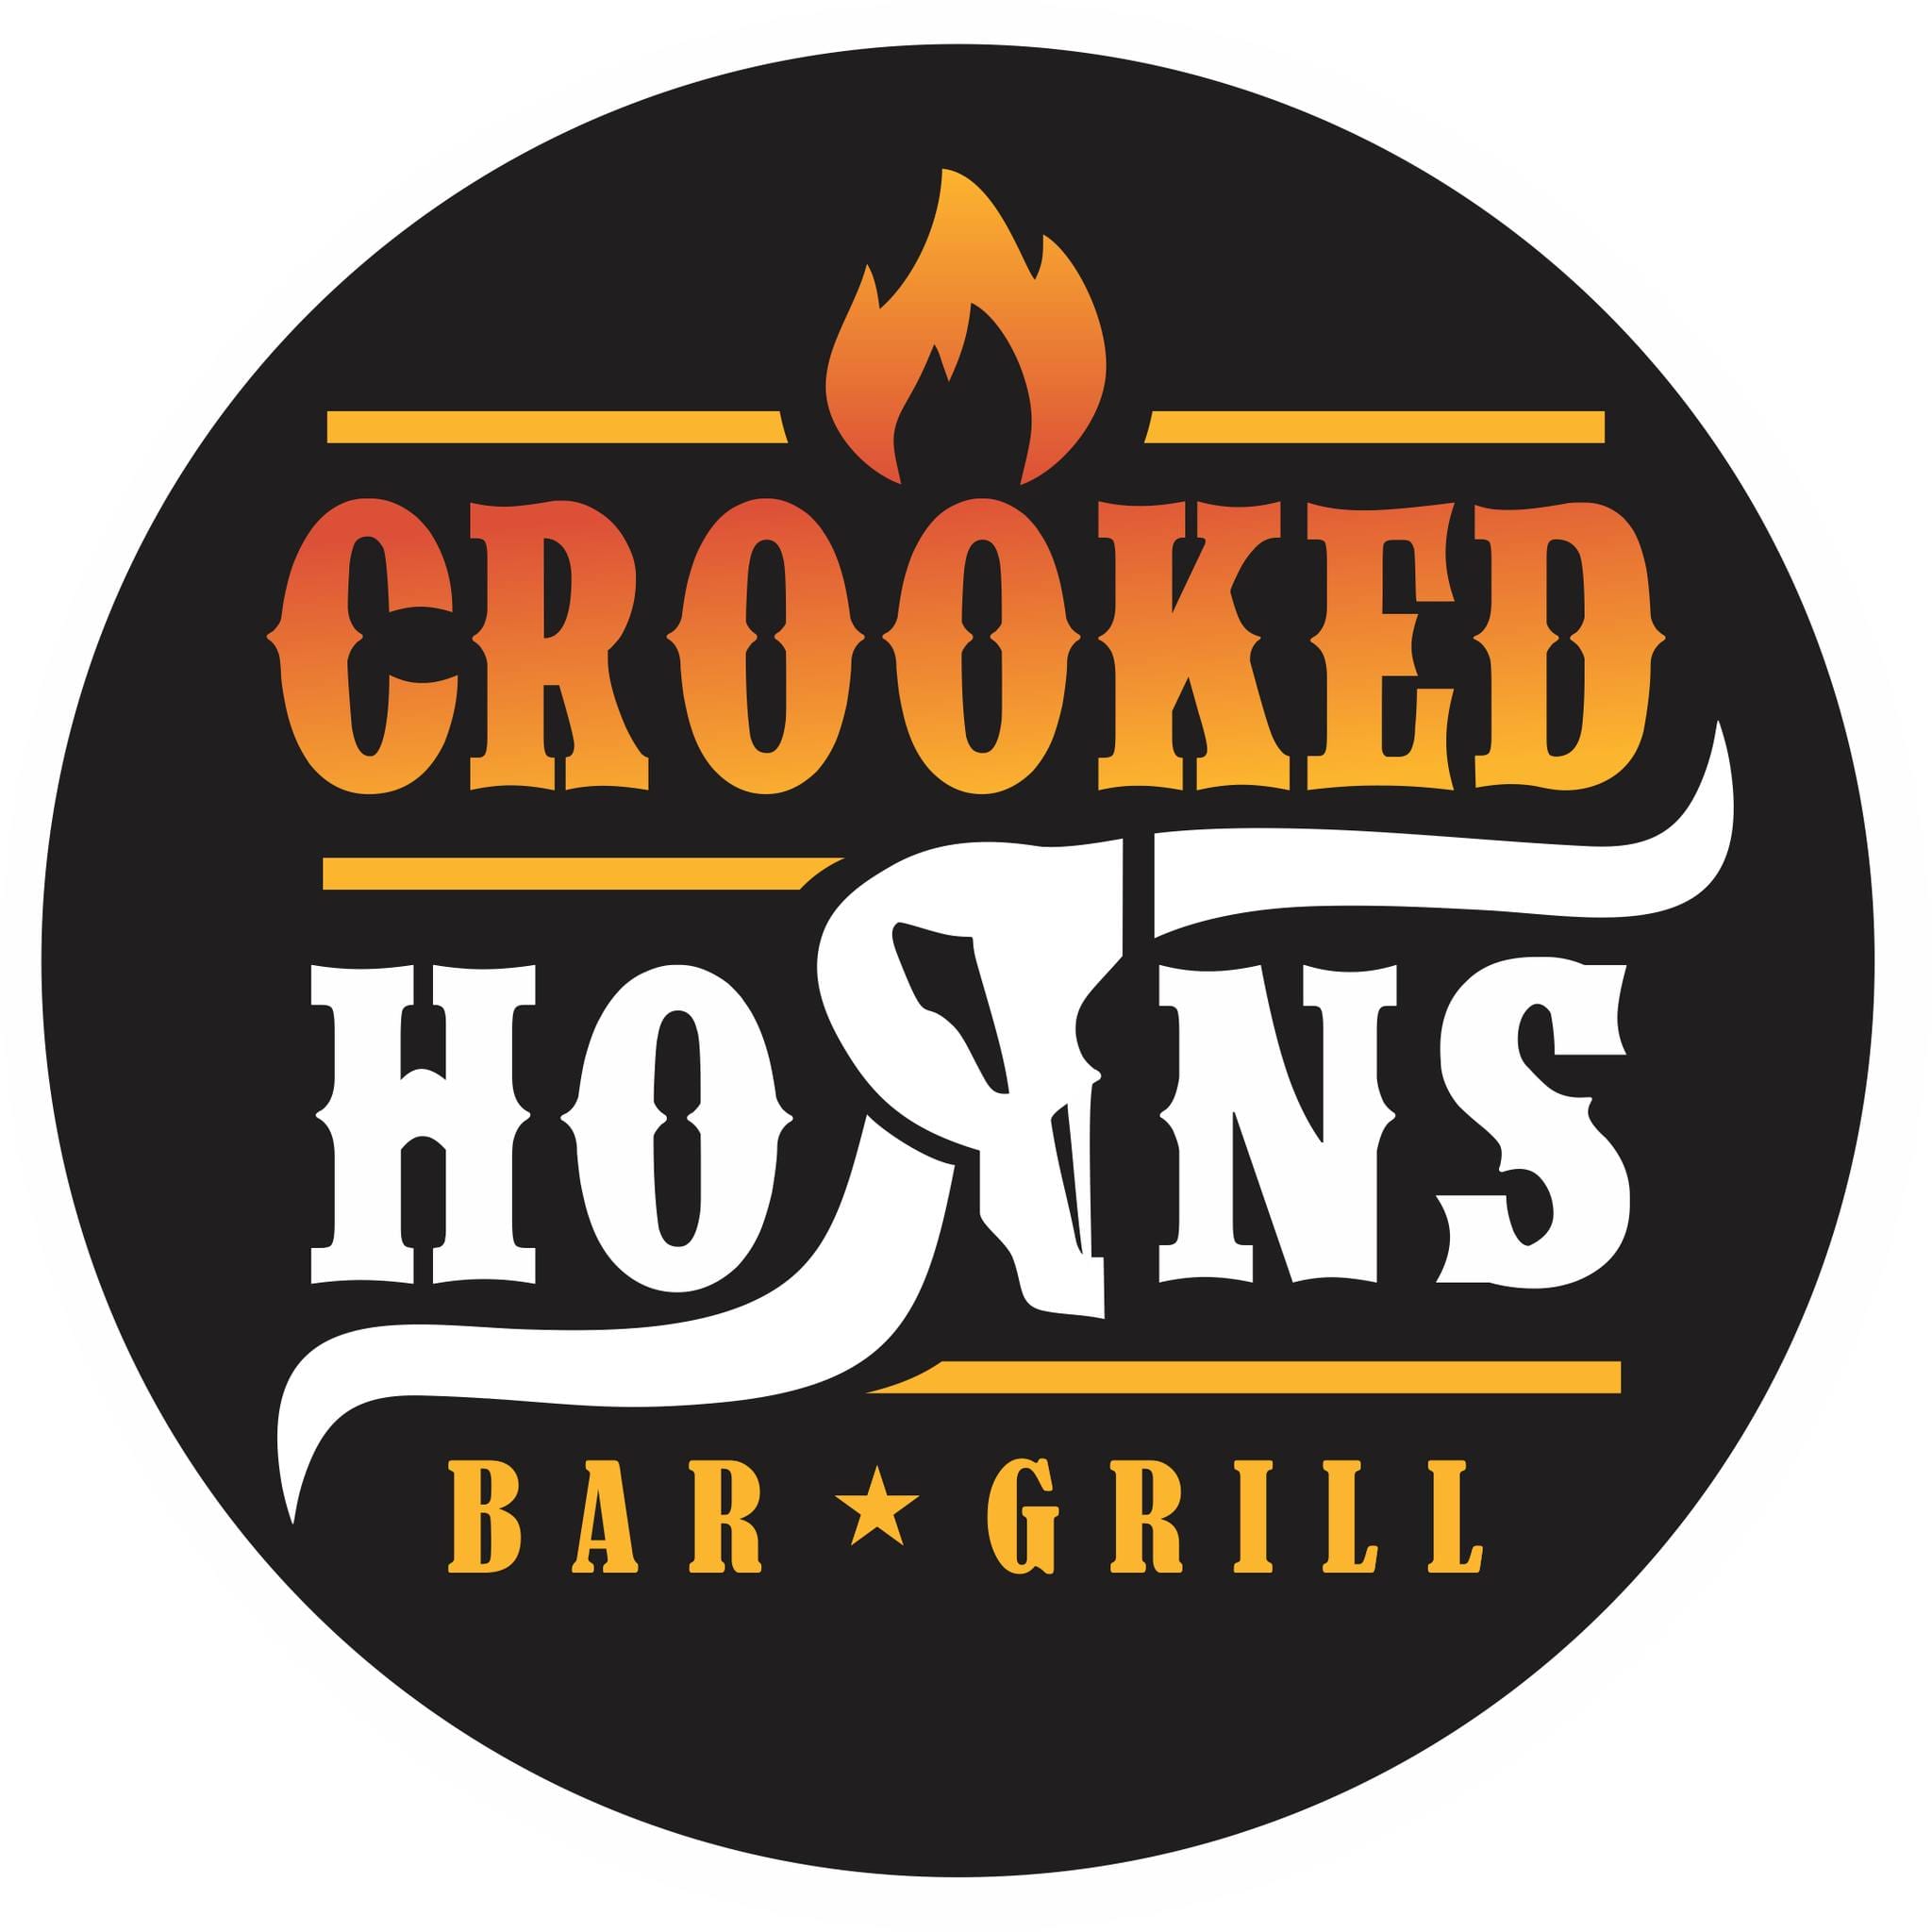 Crooked Horns Bar & Grill logo. Sycamore Chamber of Commerce.